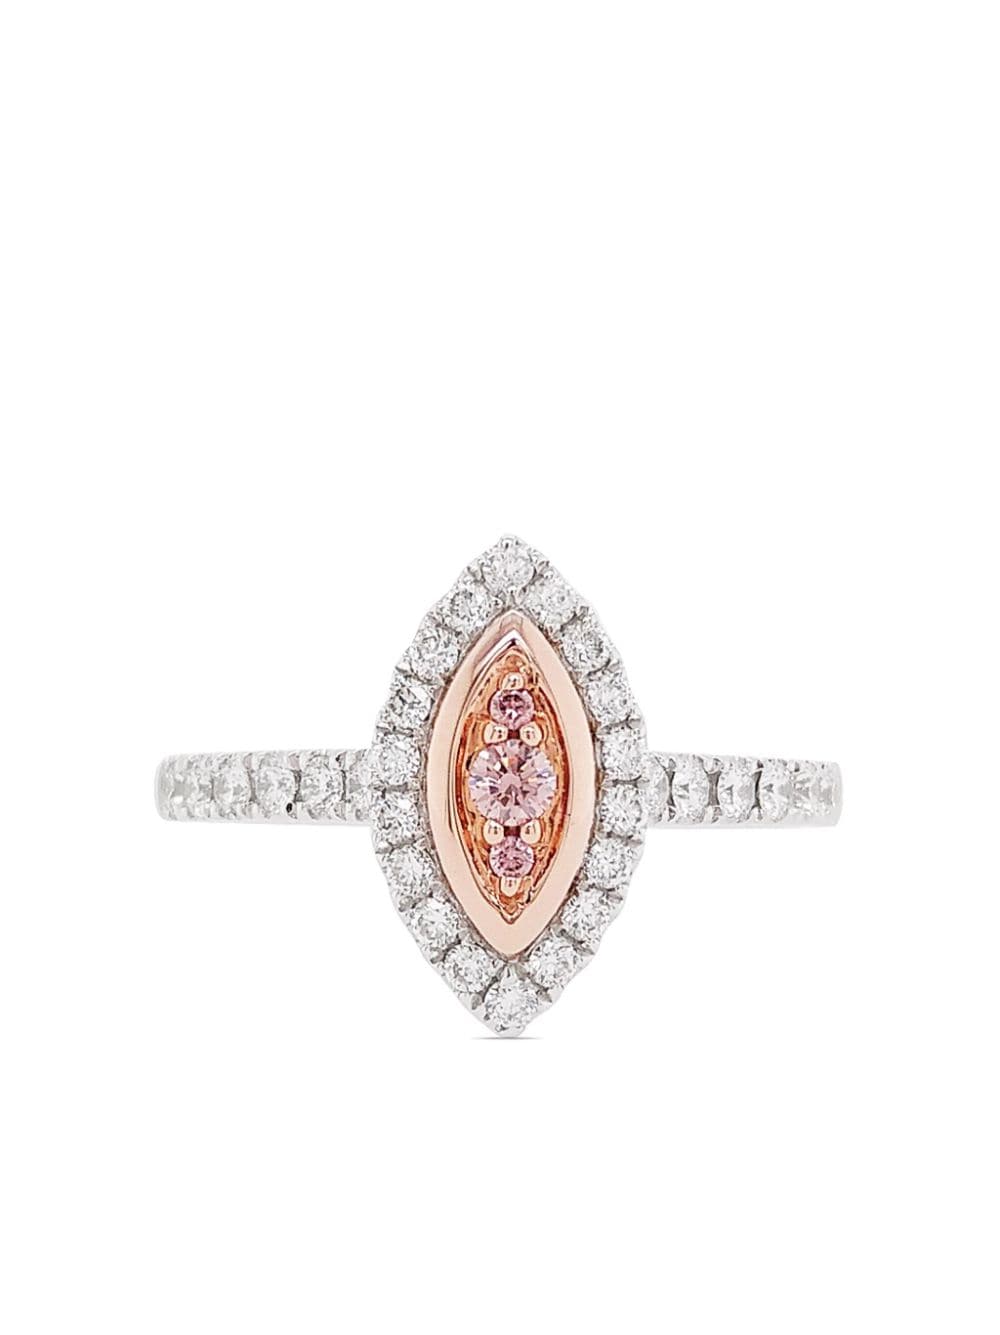 Hyt Jewelry Rose Gold And Platinum Diamond Ring In Silver